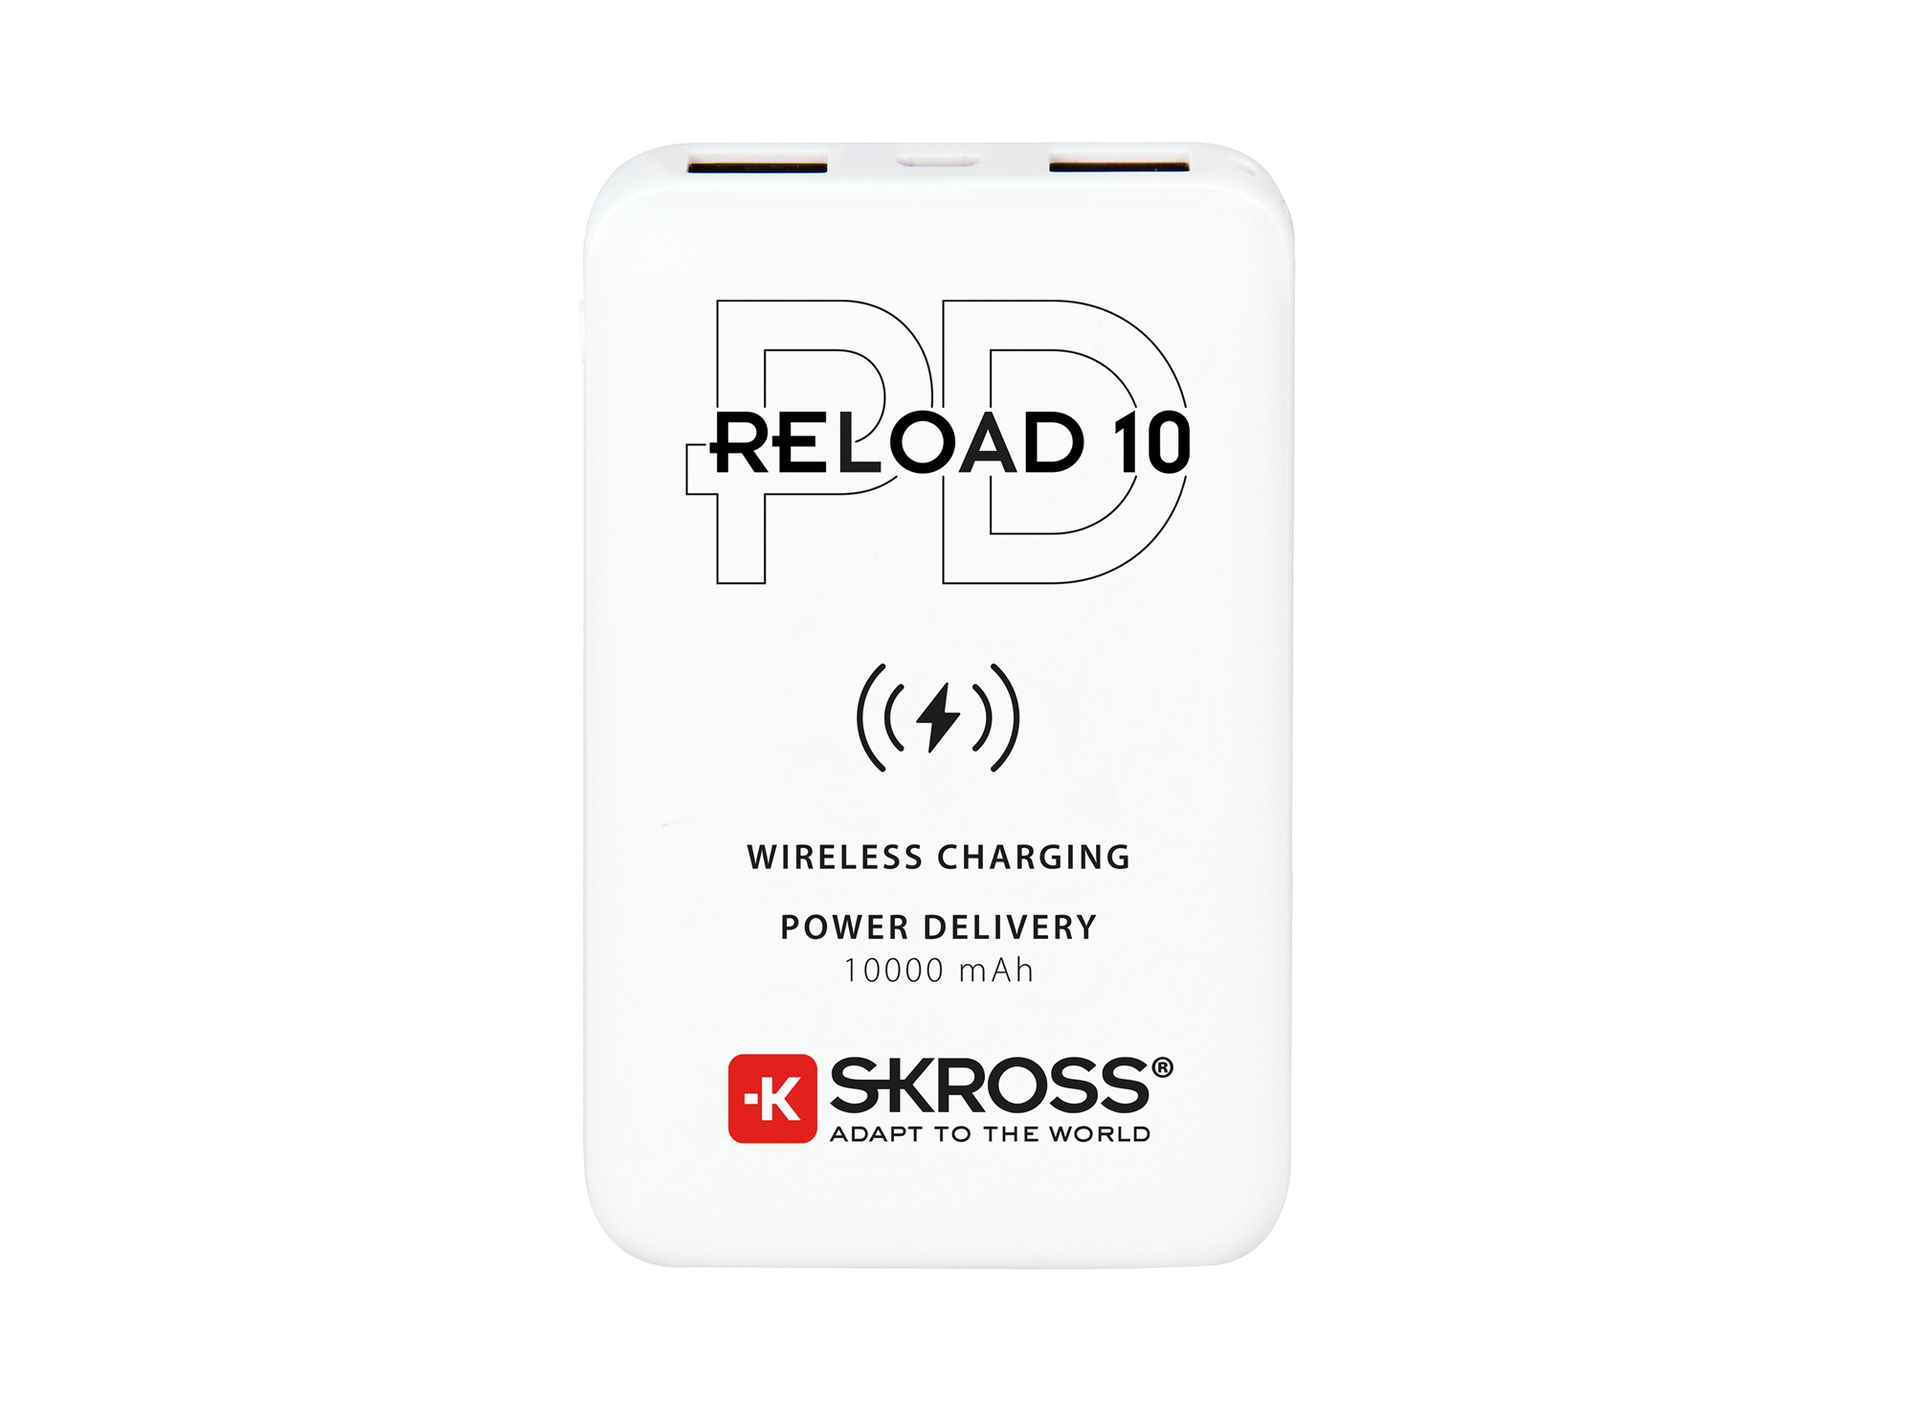 Skross power delivery and wireless charging 10,000 mAh power bank reload 10 Qi PD front